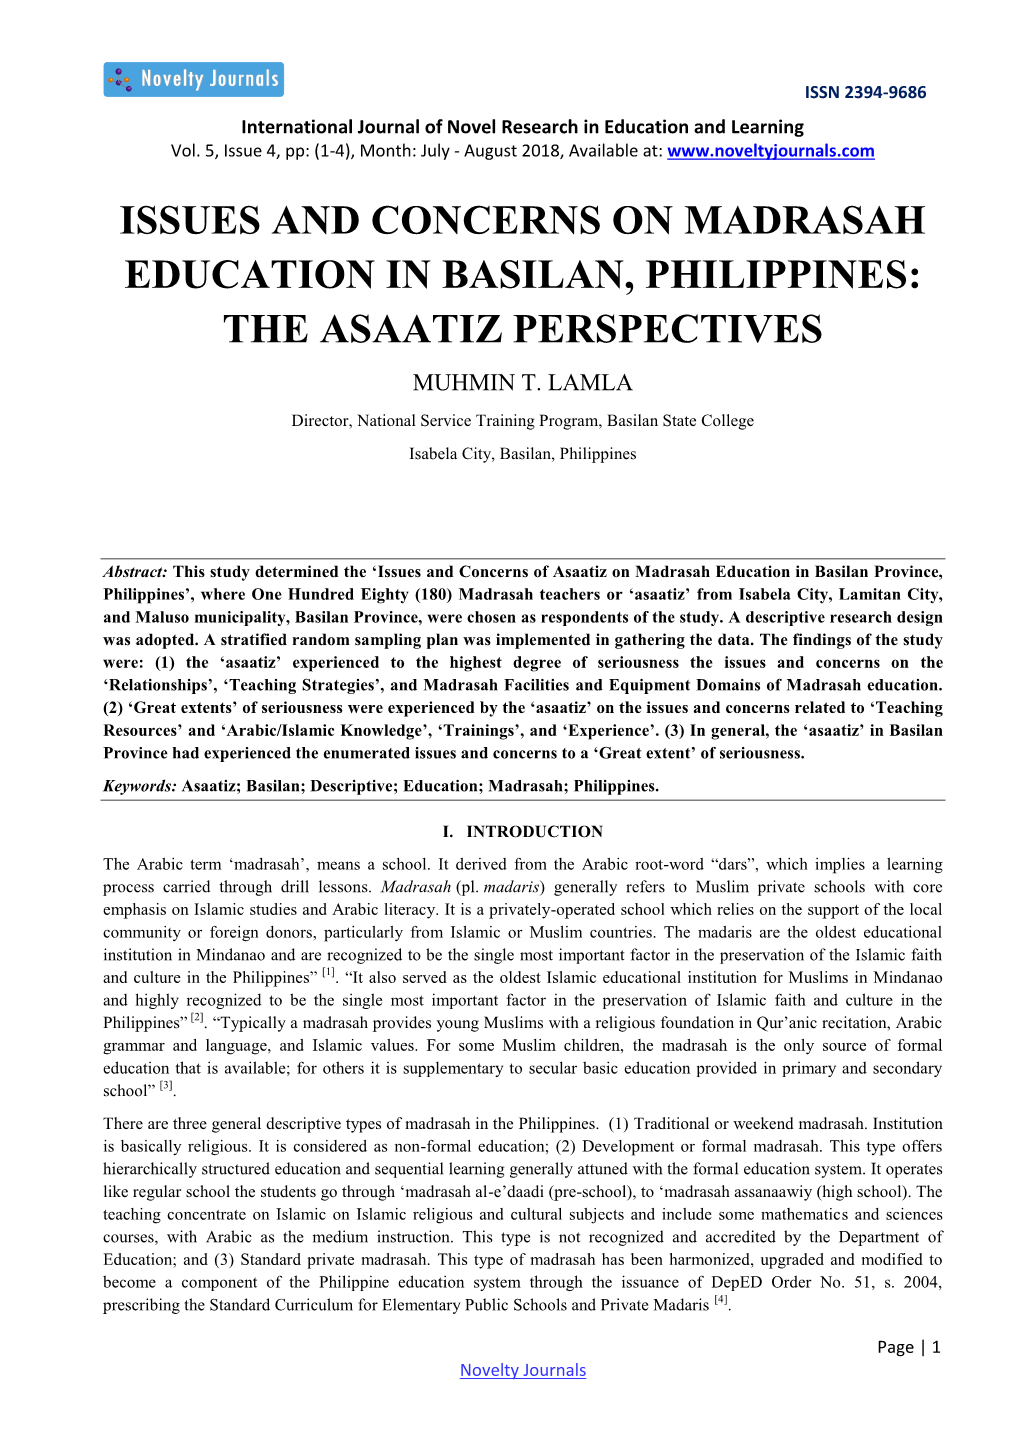 Issues and Concerns on Madrasah Education in Basilan, Philippines: the Asaatiz Perspectives Muhmin T